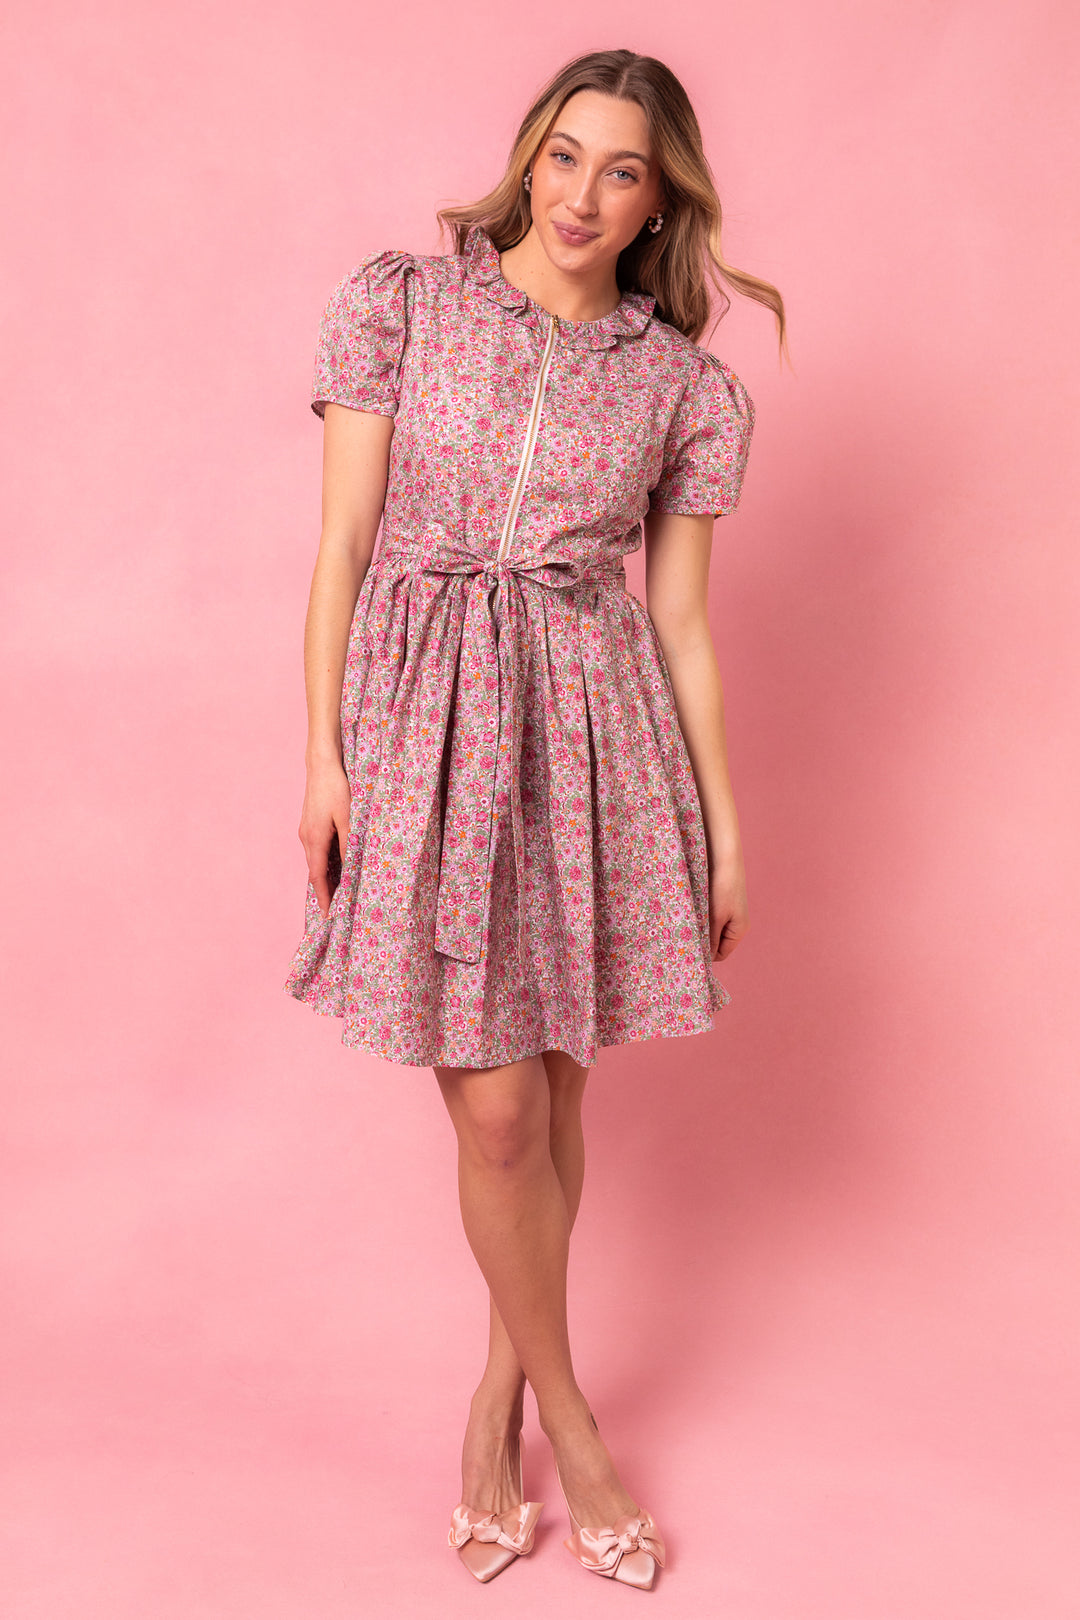 Chelsea Dress Made With Liberty Fabric - FINAL SALE